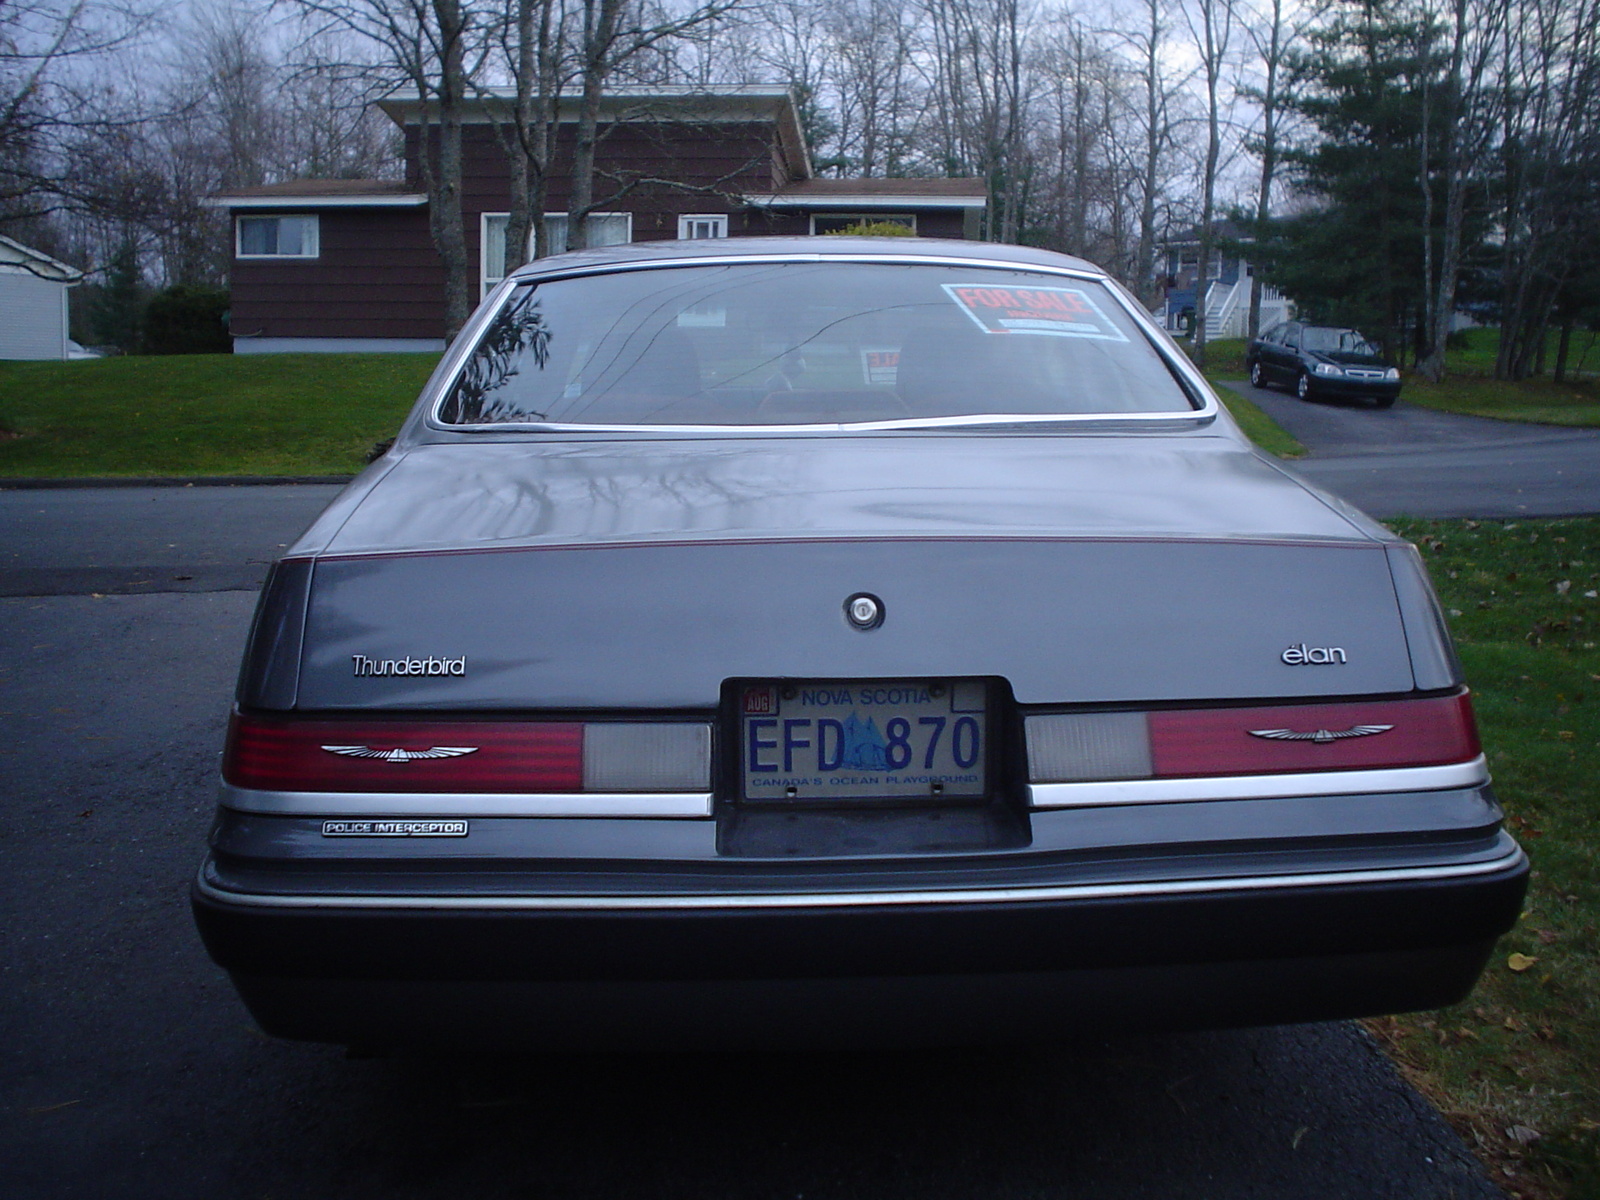 1989 Ford thunderbird sc review #3